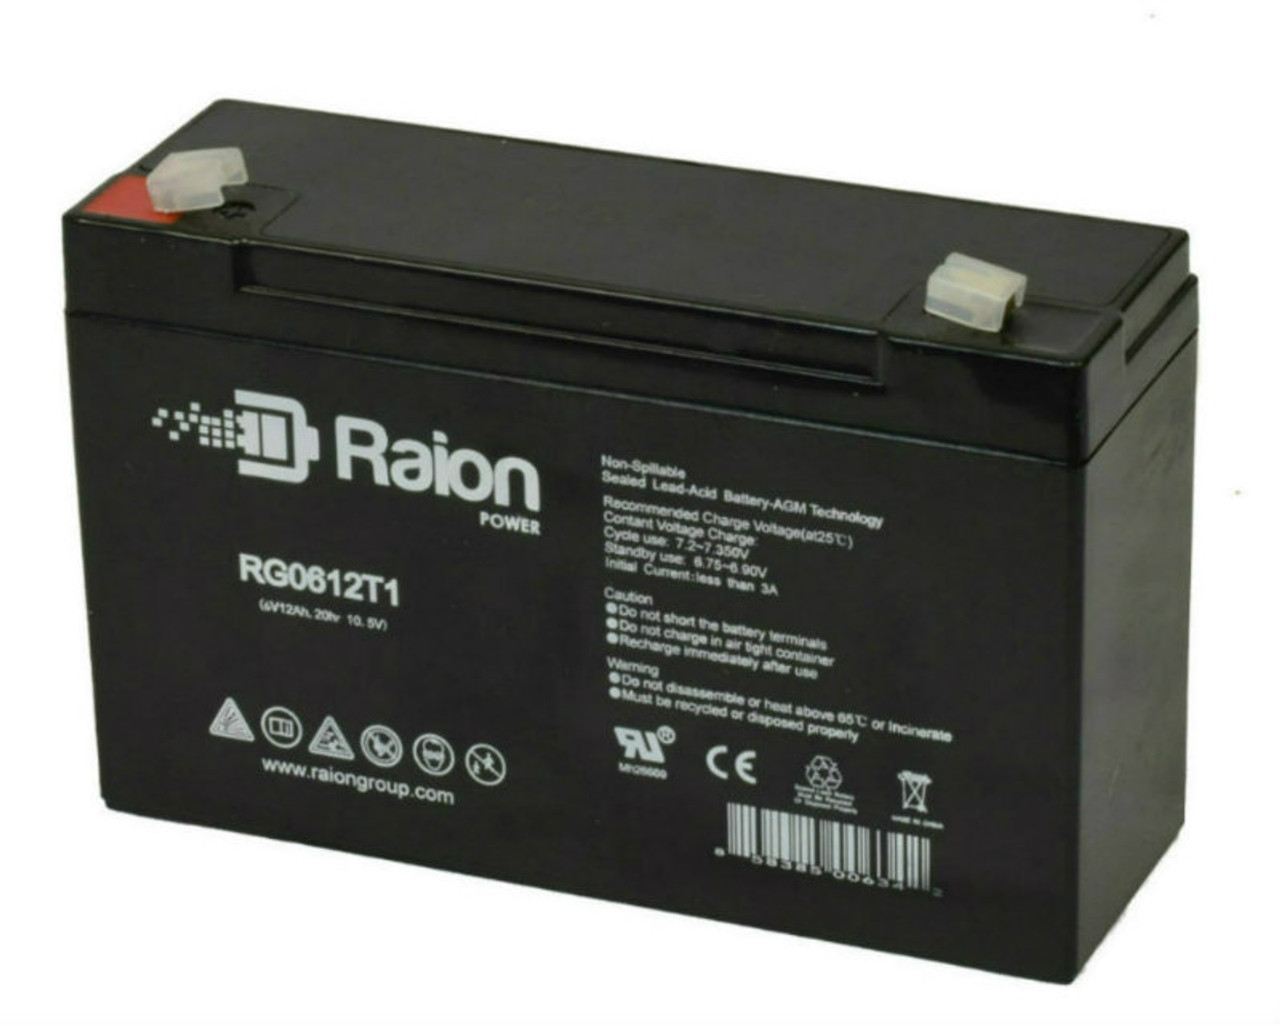 Raion Power RG06120T1 Replacement Battery for Henglypower HL6140